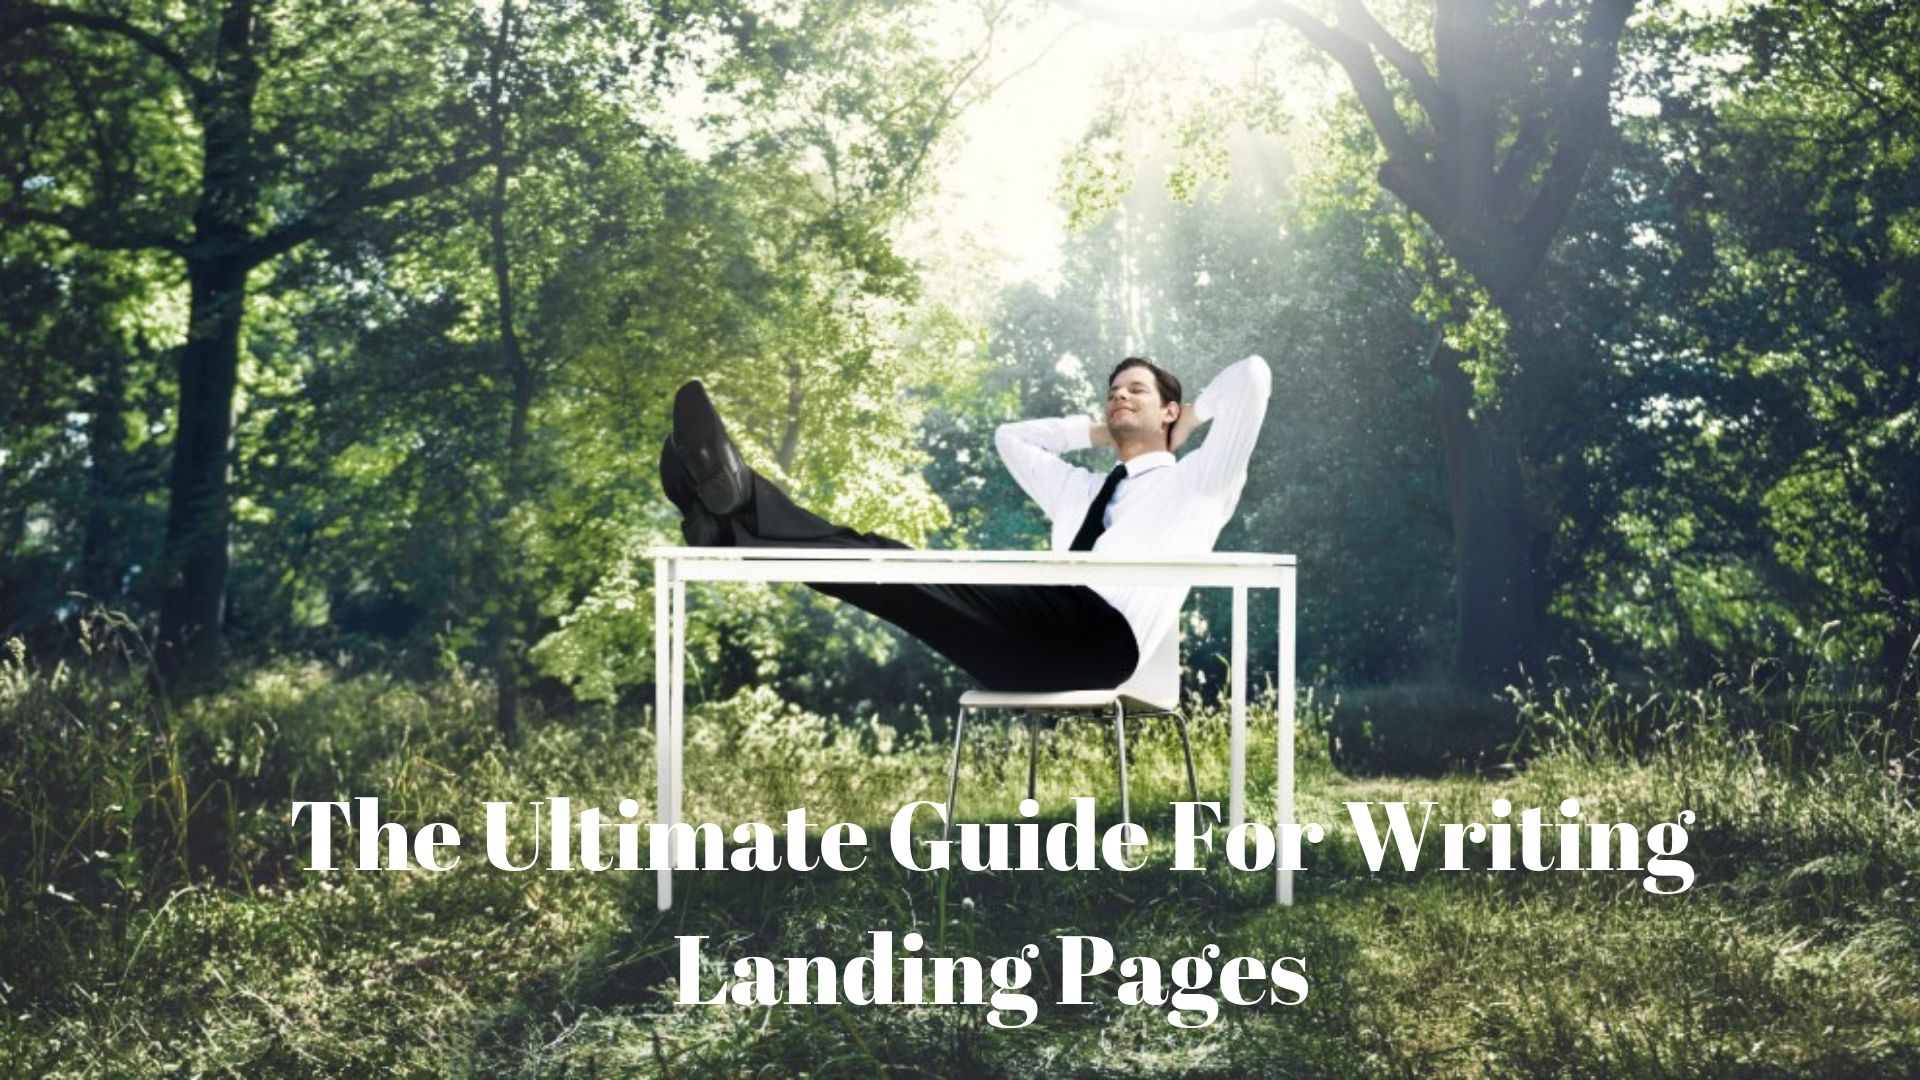 The Ultimate Guide to Writing Landing Pages